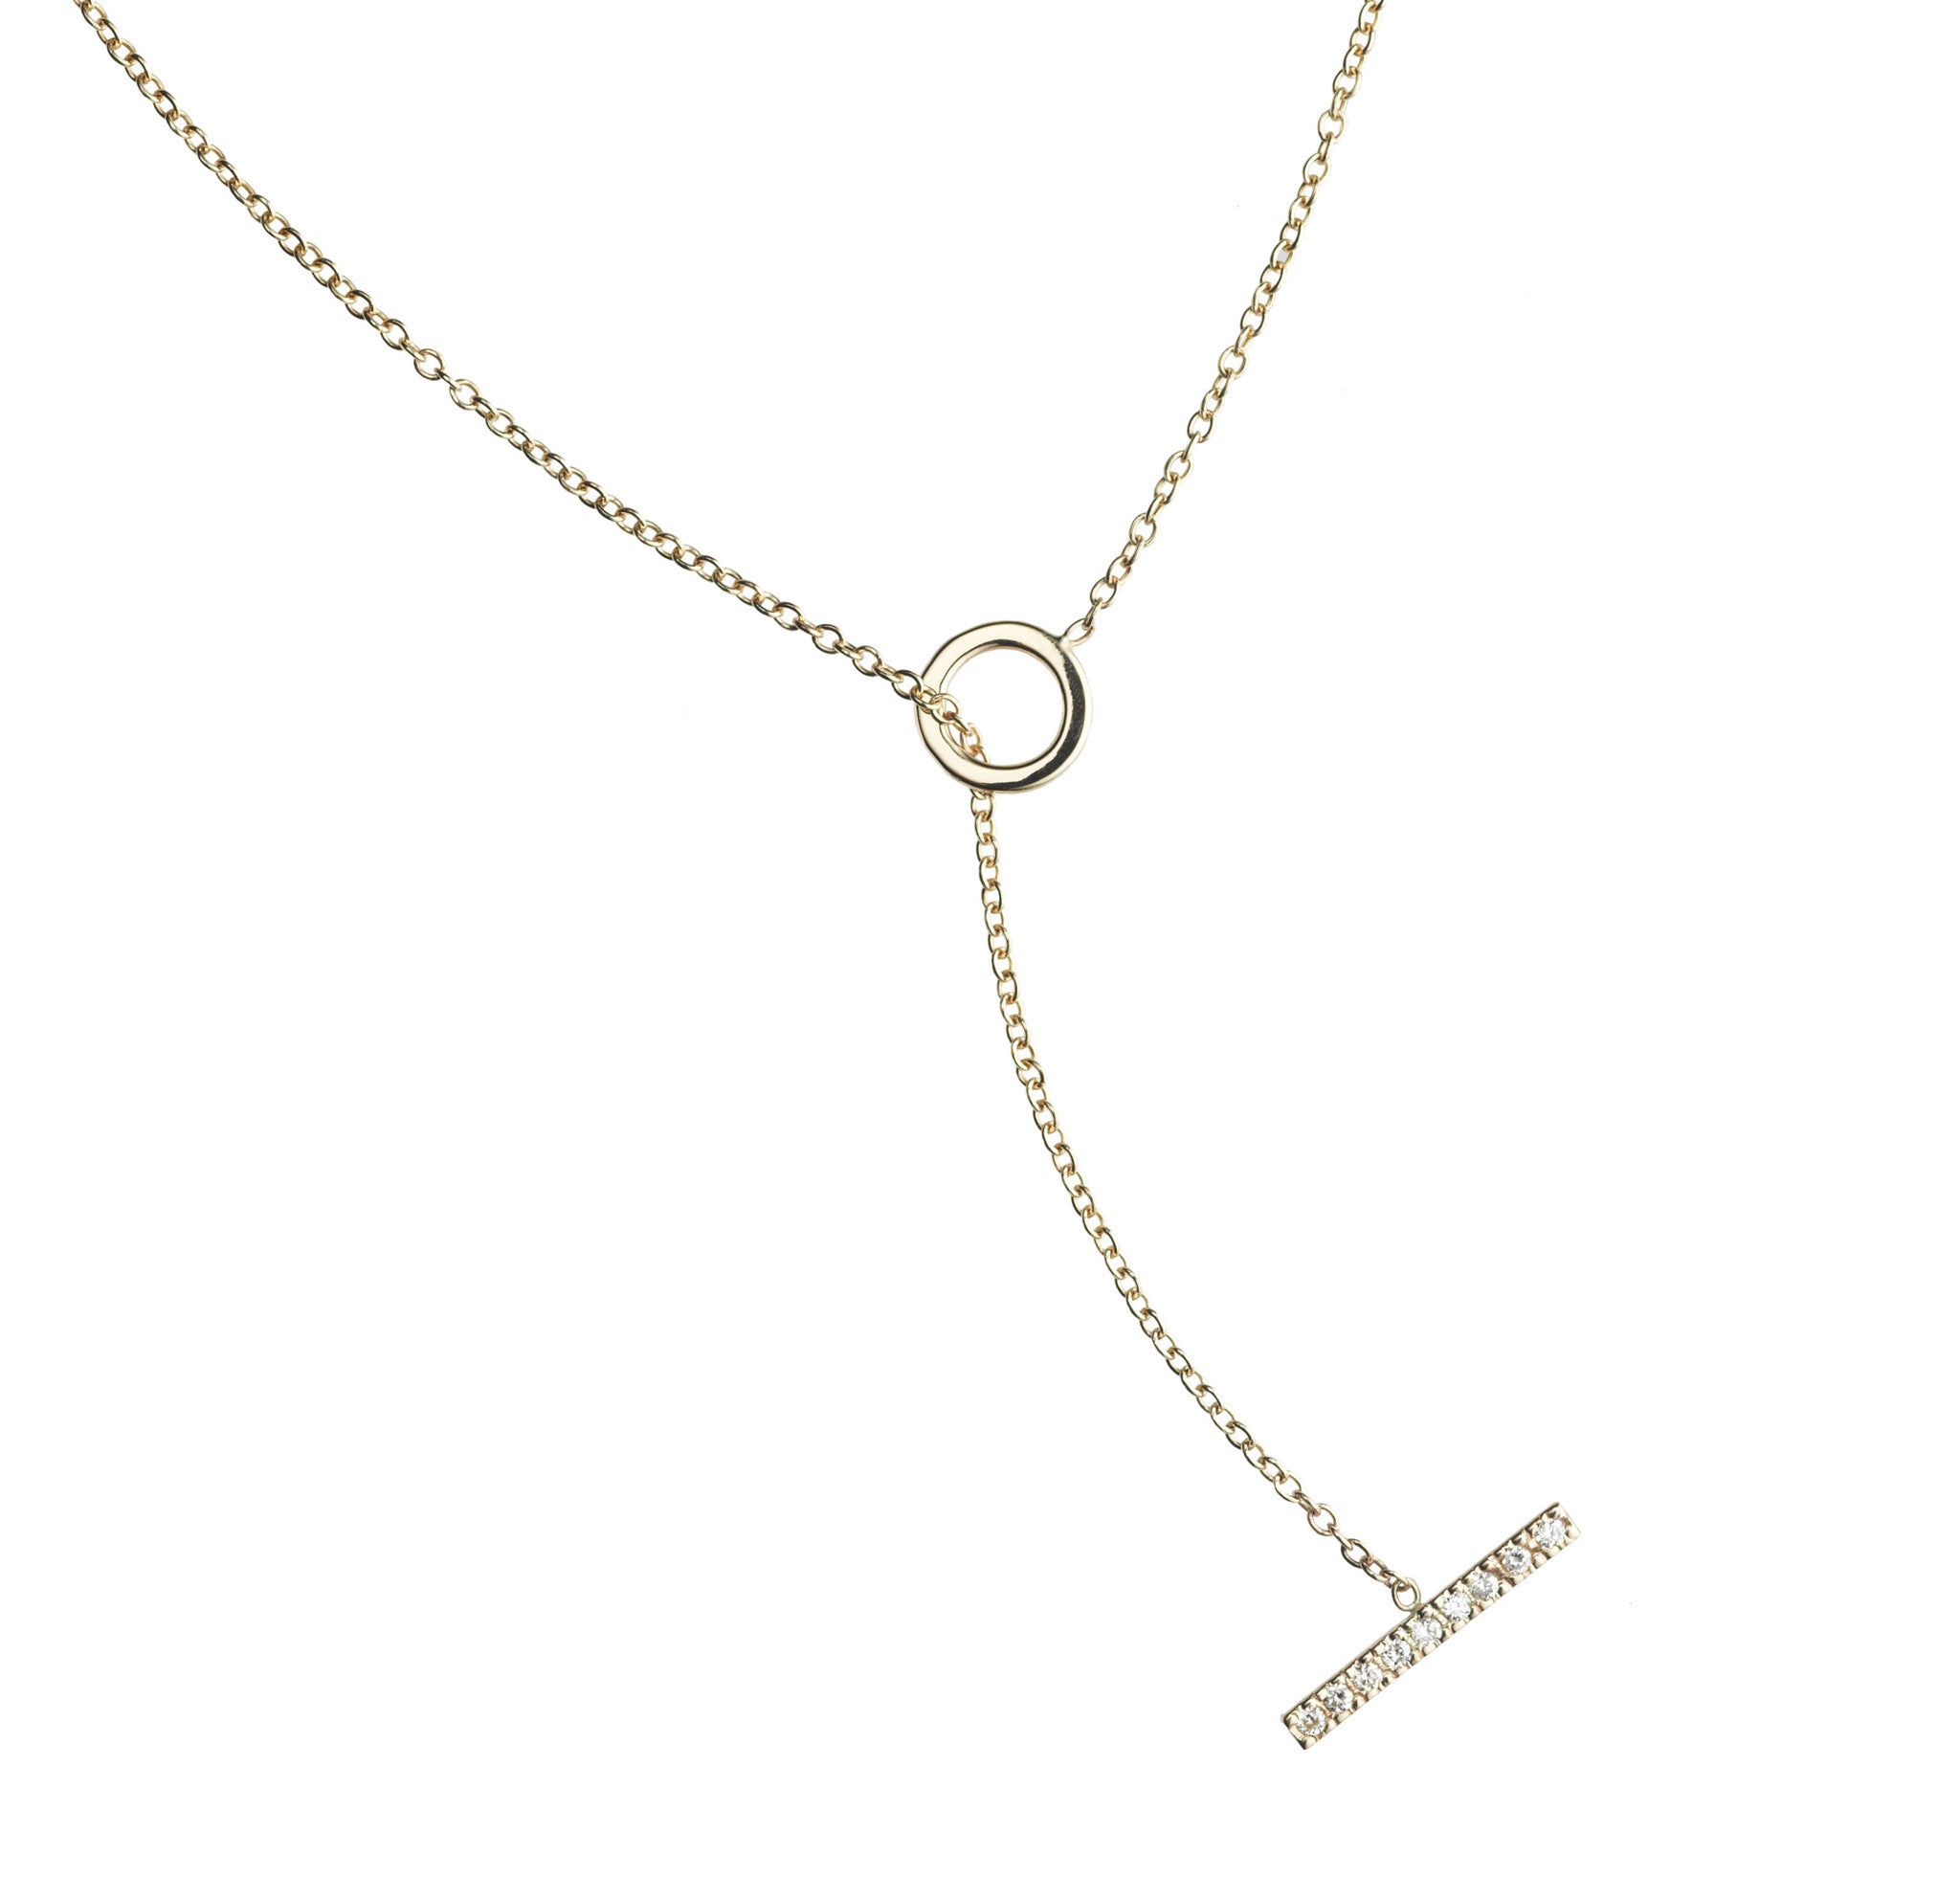 Italian Gold Tri-Gold Lariat Necklace in 14k Gold, White Gold and Rose Gold  - Tri | CoolSprings Galleria